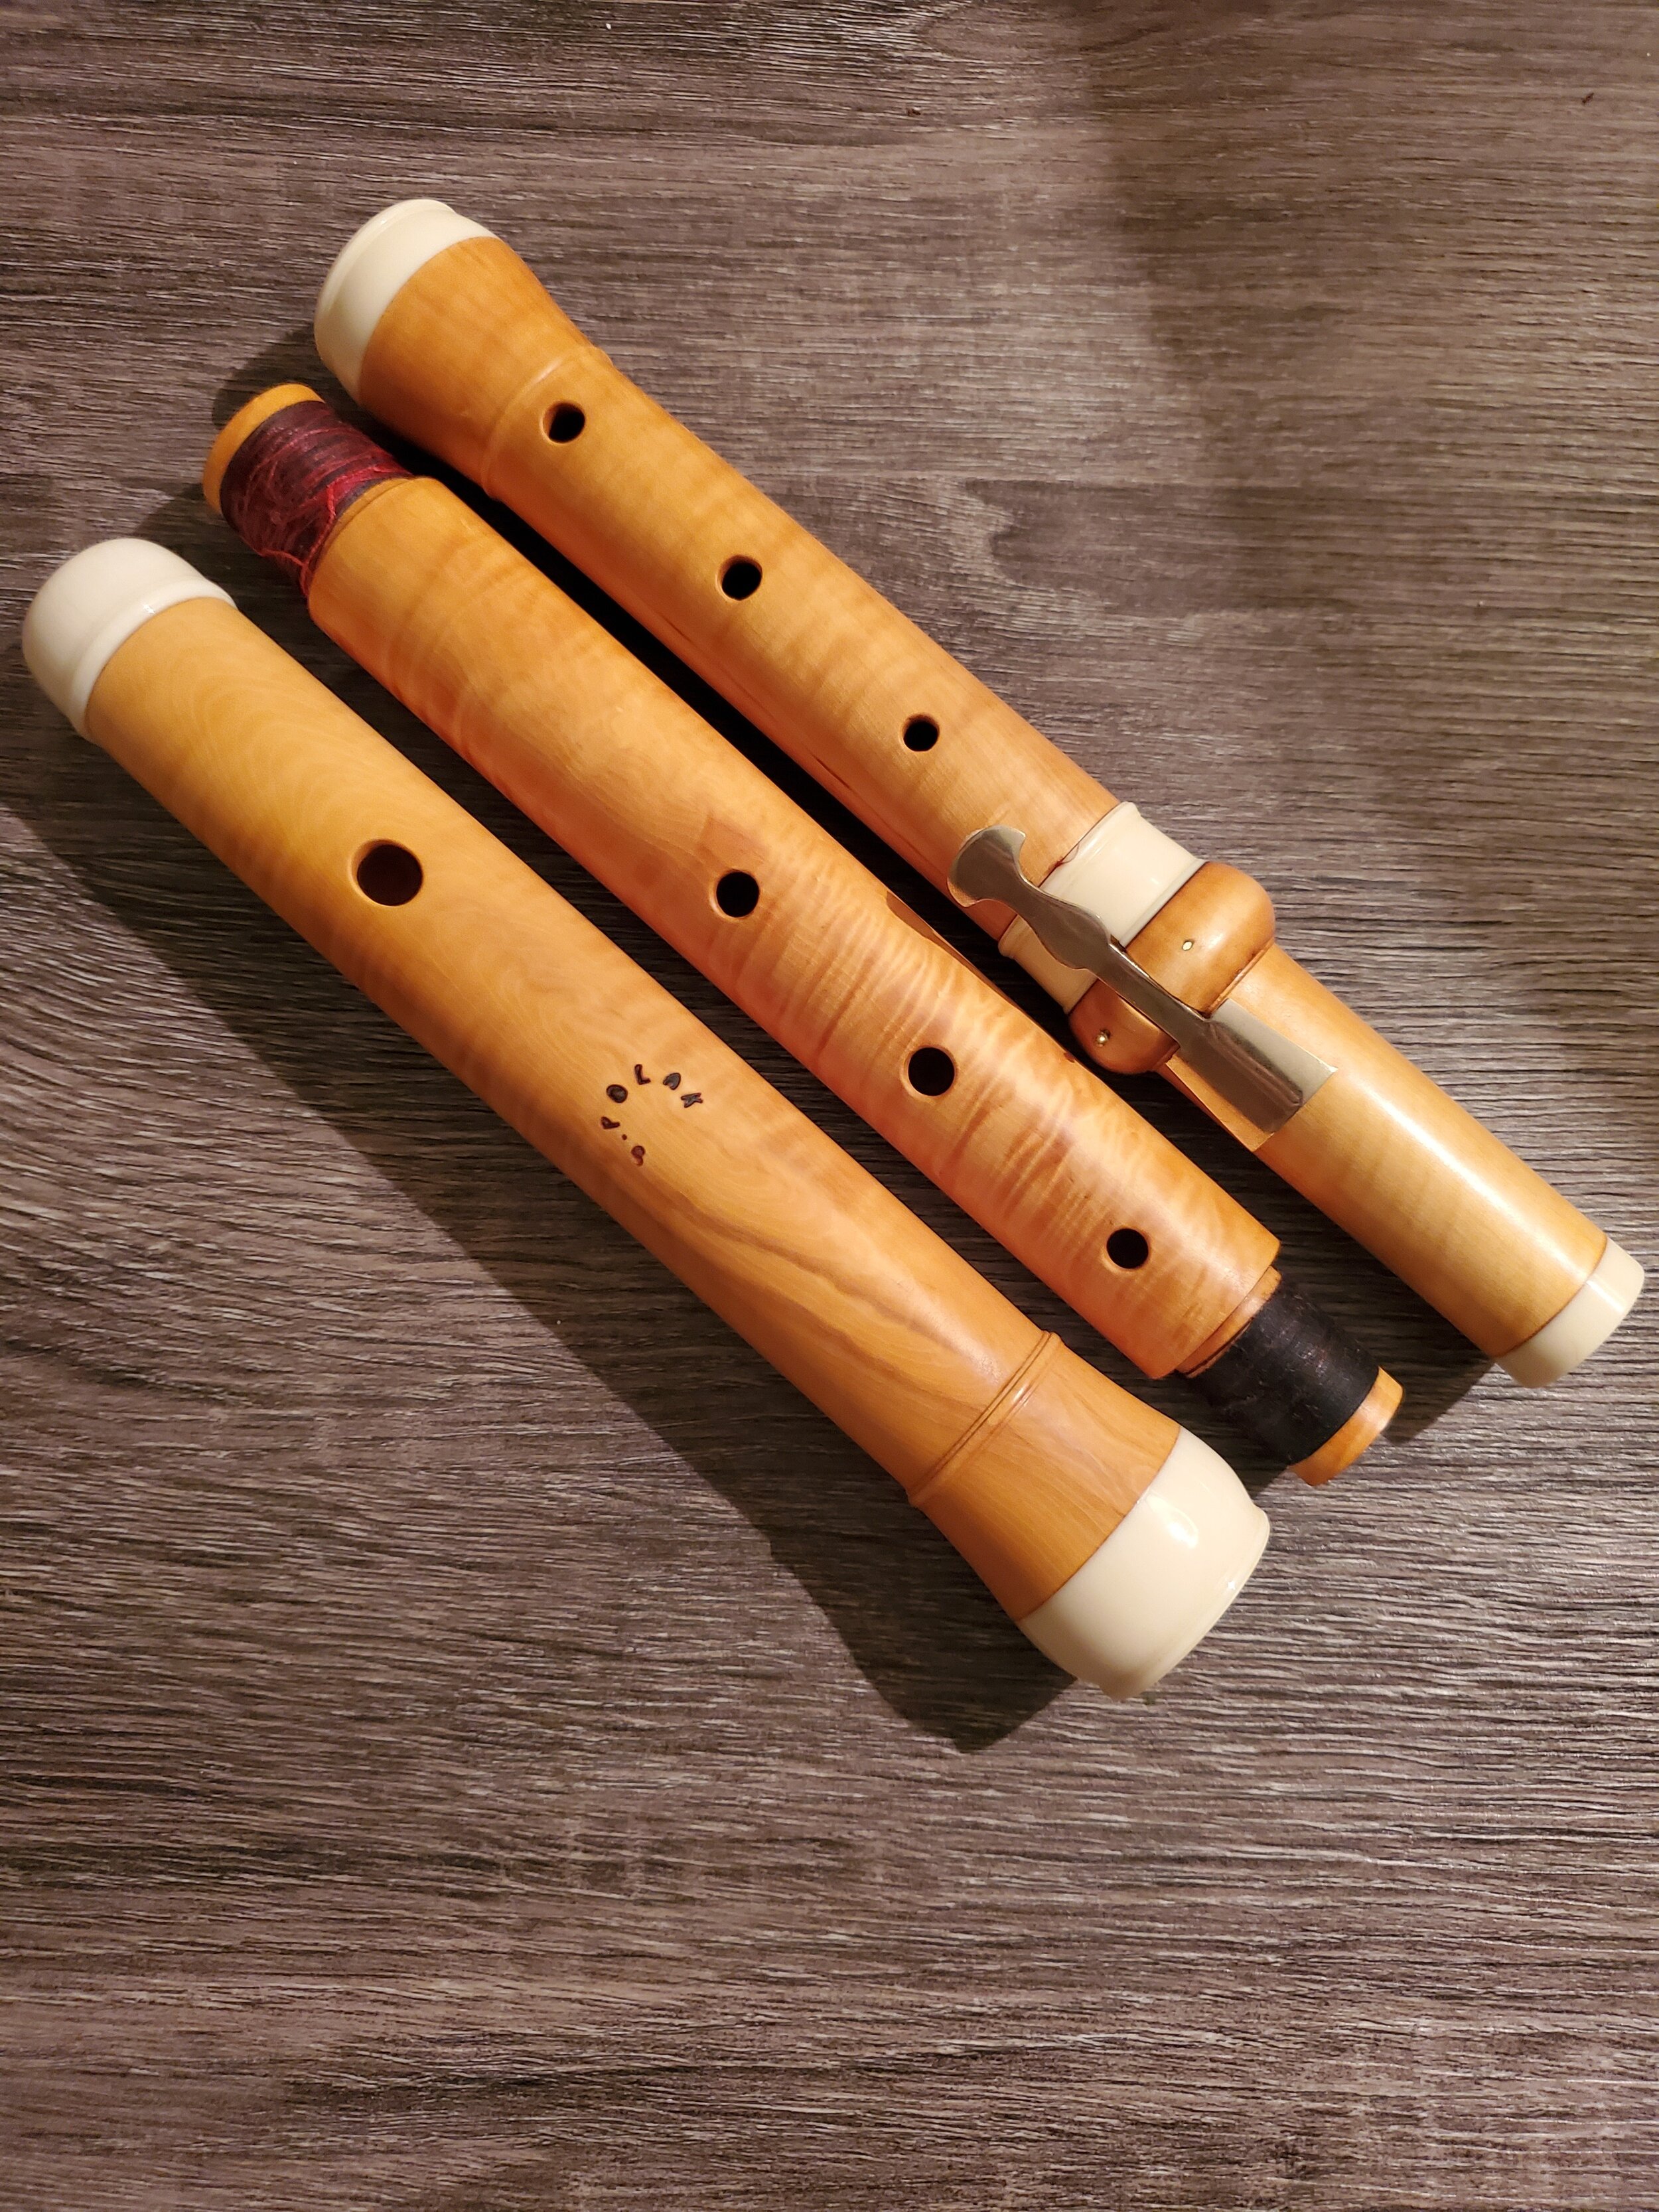  Flute after Palanca in Flamed Boxwood by Simon Polak. A=415 